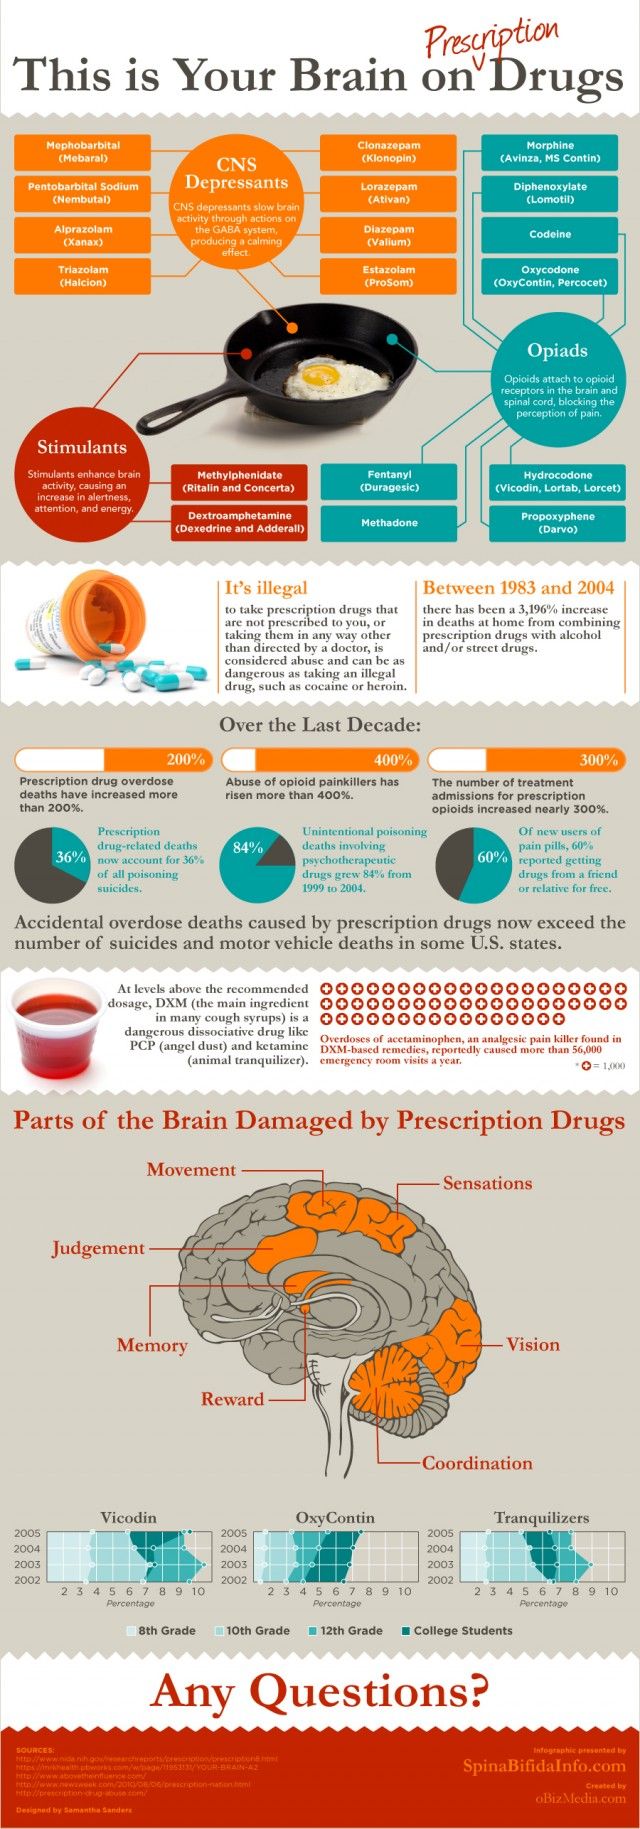 Your Brain on Prescription Drugs | Daily Infographic